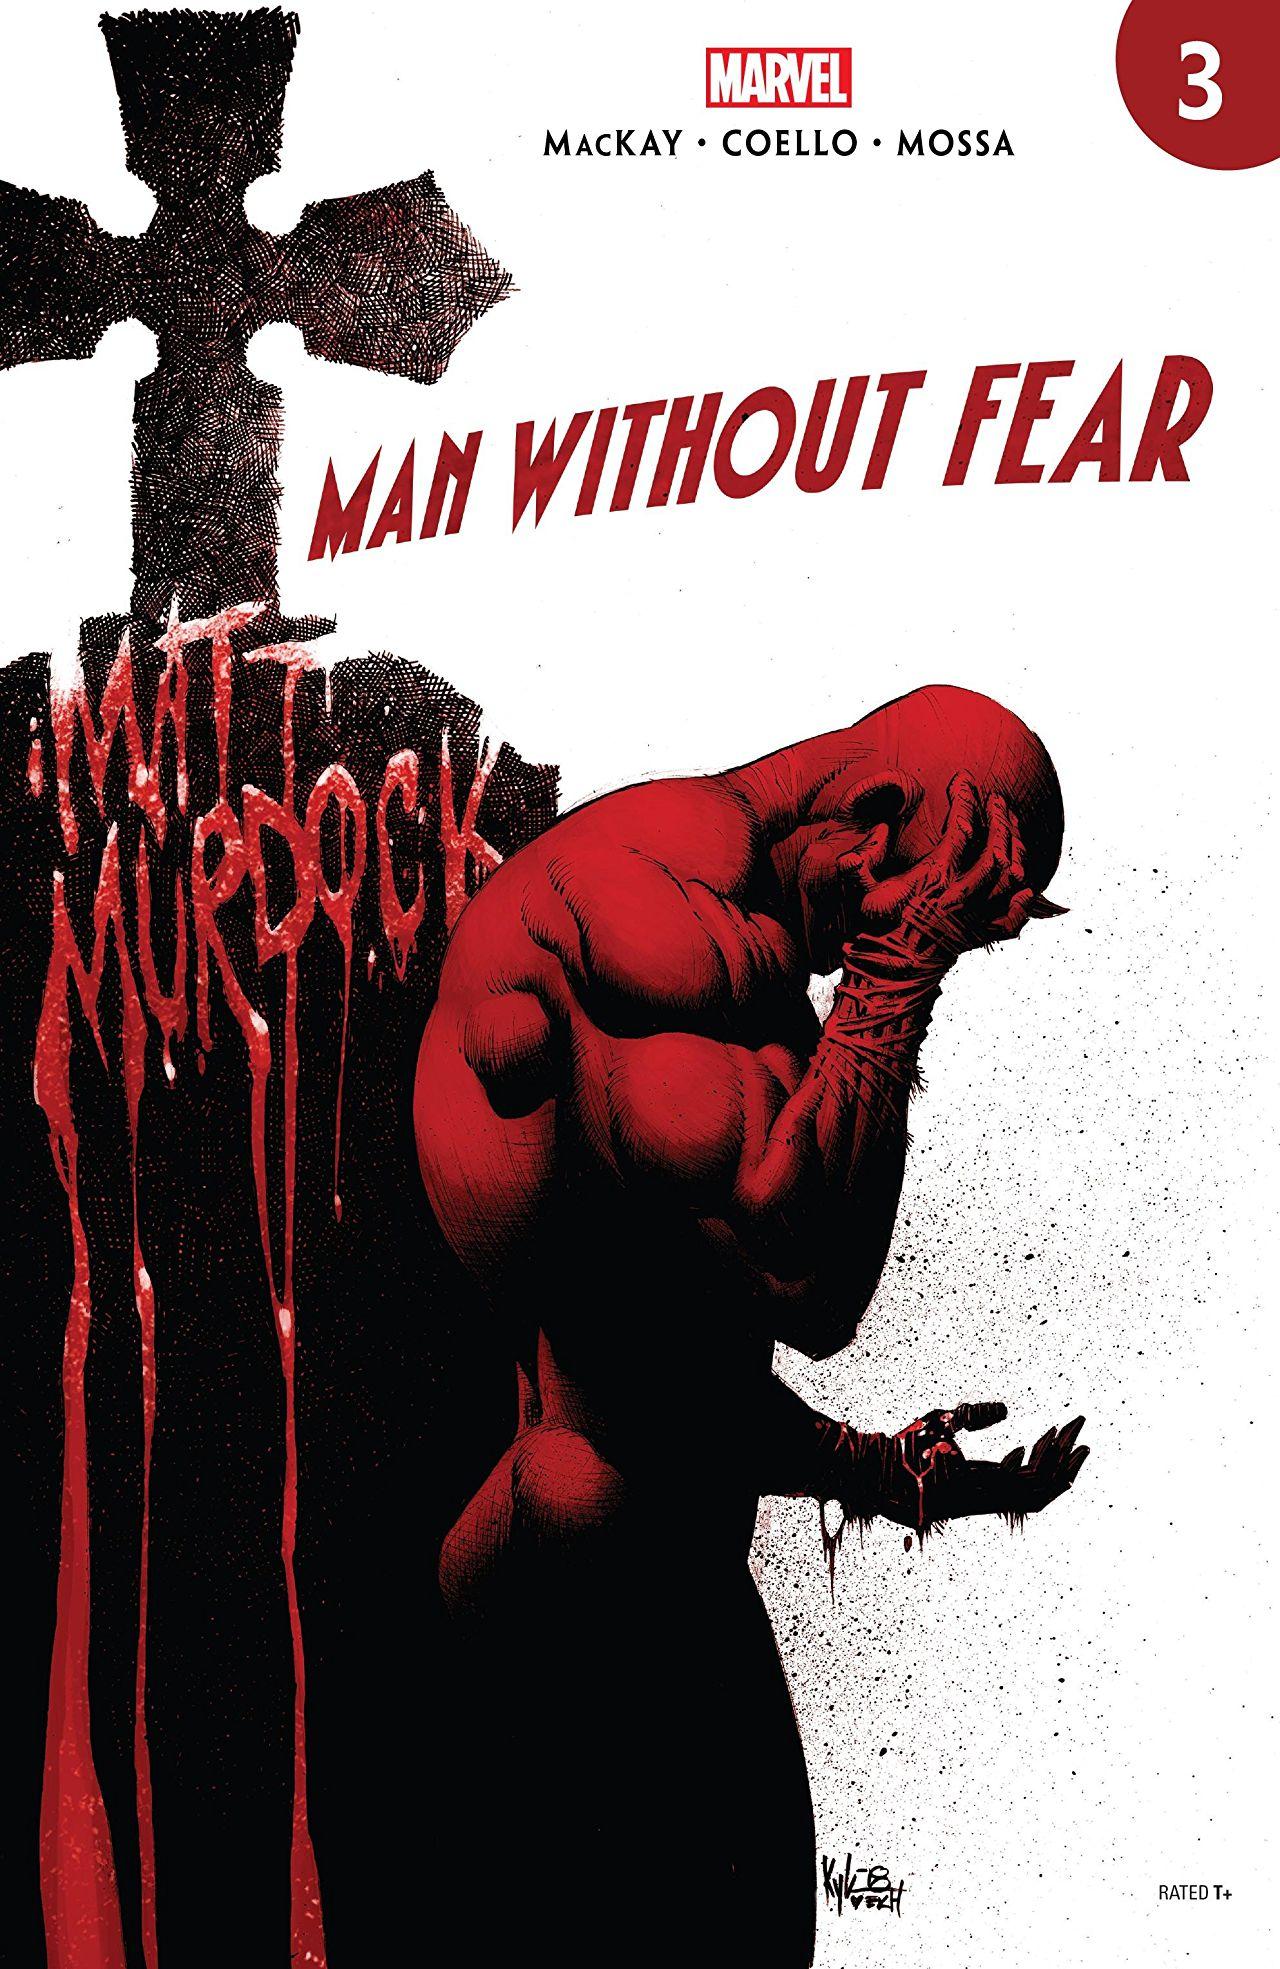 Man Without Fear Vol. 1 #3